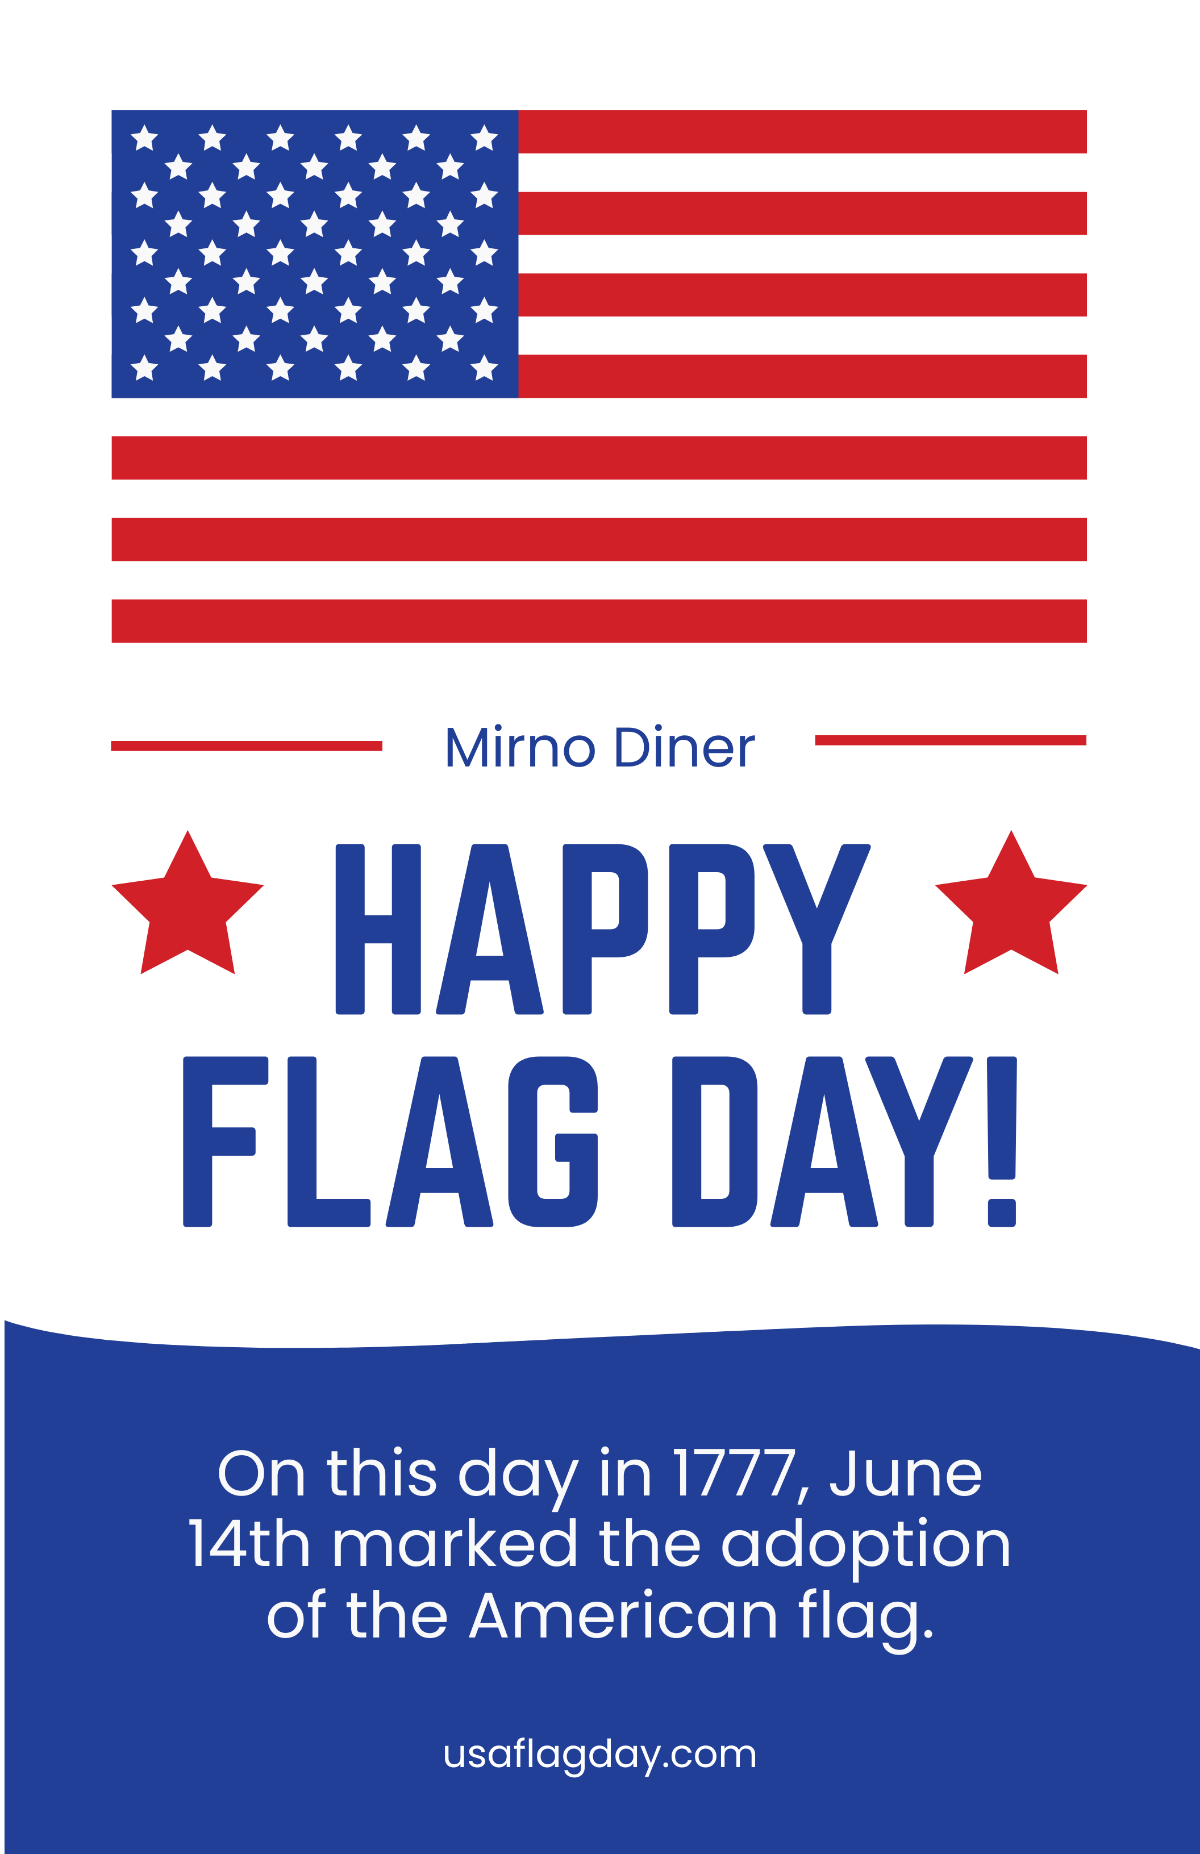 Happy Flag Day Poster Template